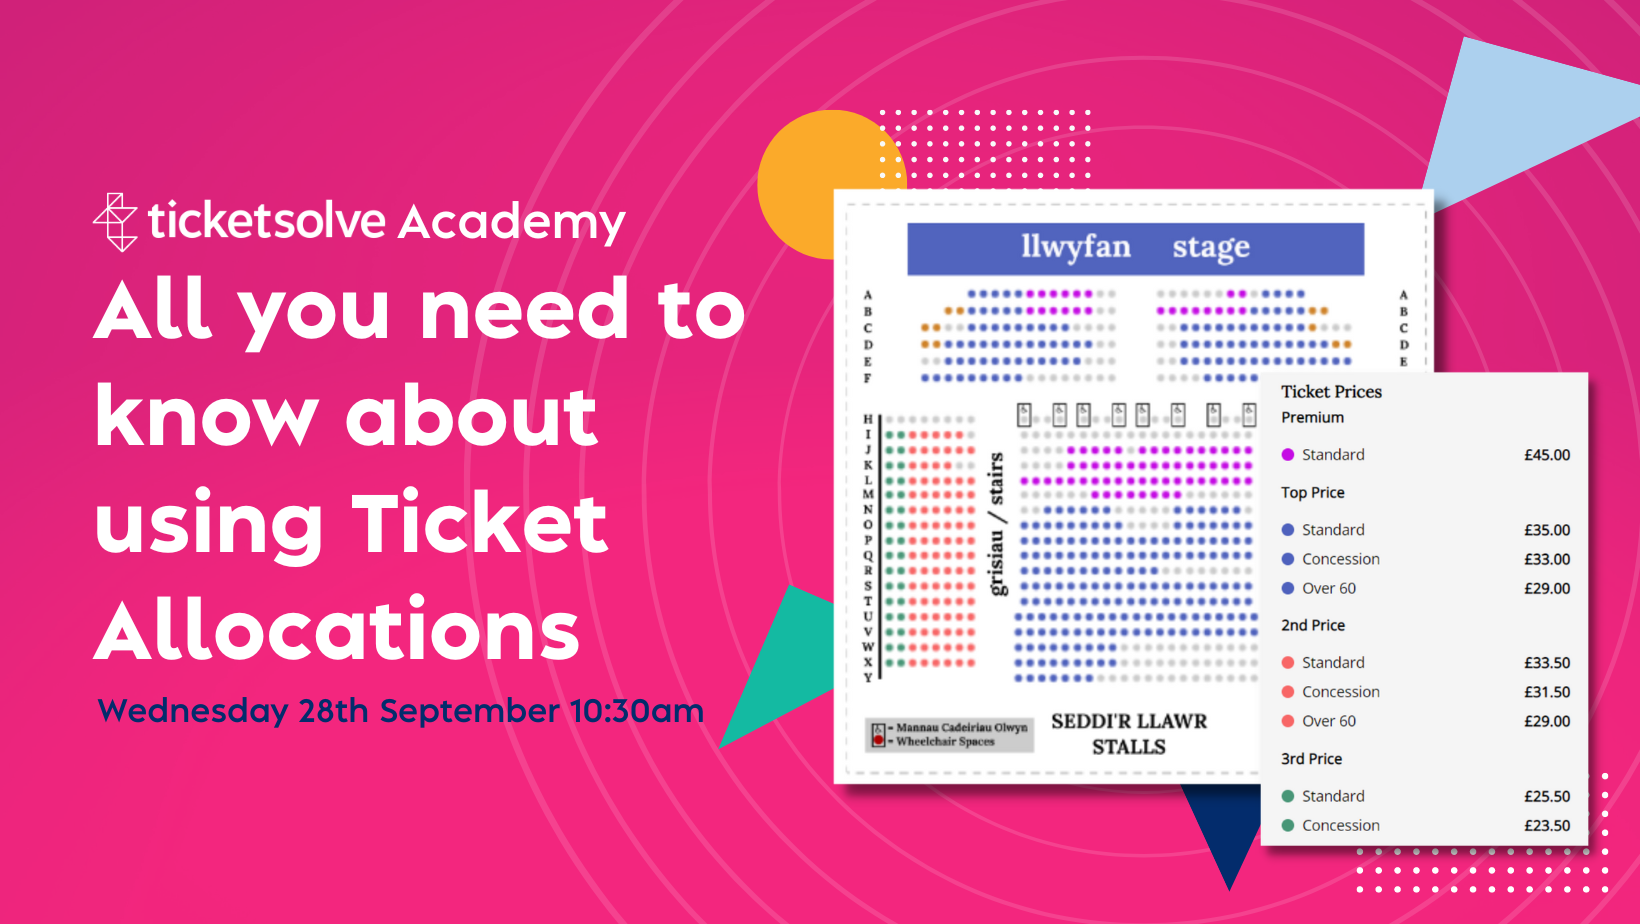 Ticketsolve Academy Session poster for 'Ticket Allocations'. The poster is on a pink background with Ticketsolve branded shapes and the main image on the right is a picture of a seating plan with various price bands on display. 